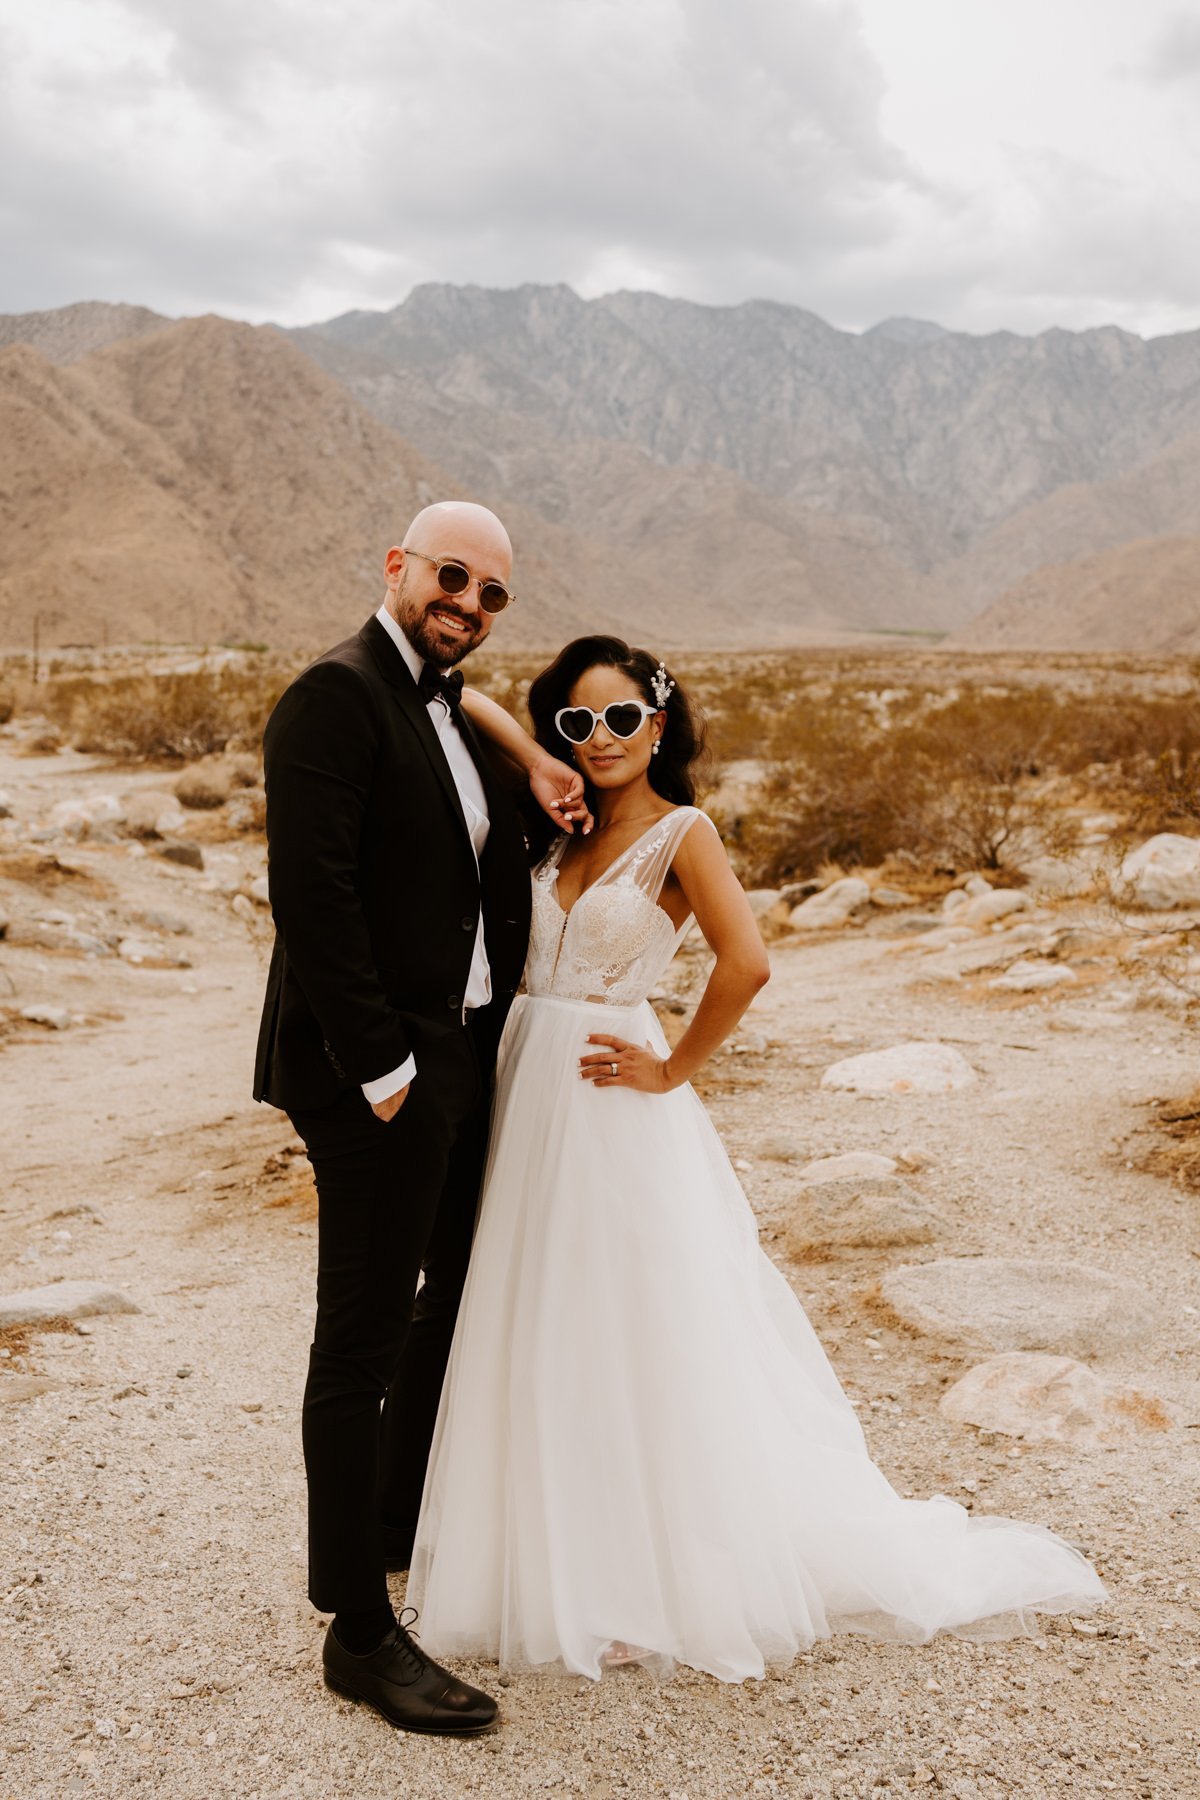 Editorial Bride and groom Palm Springs desert wedding photo, Photo by Tida Svy, Palm Springs Elopement Photographer